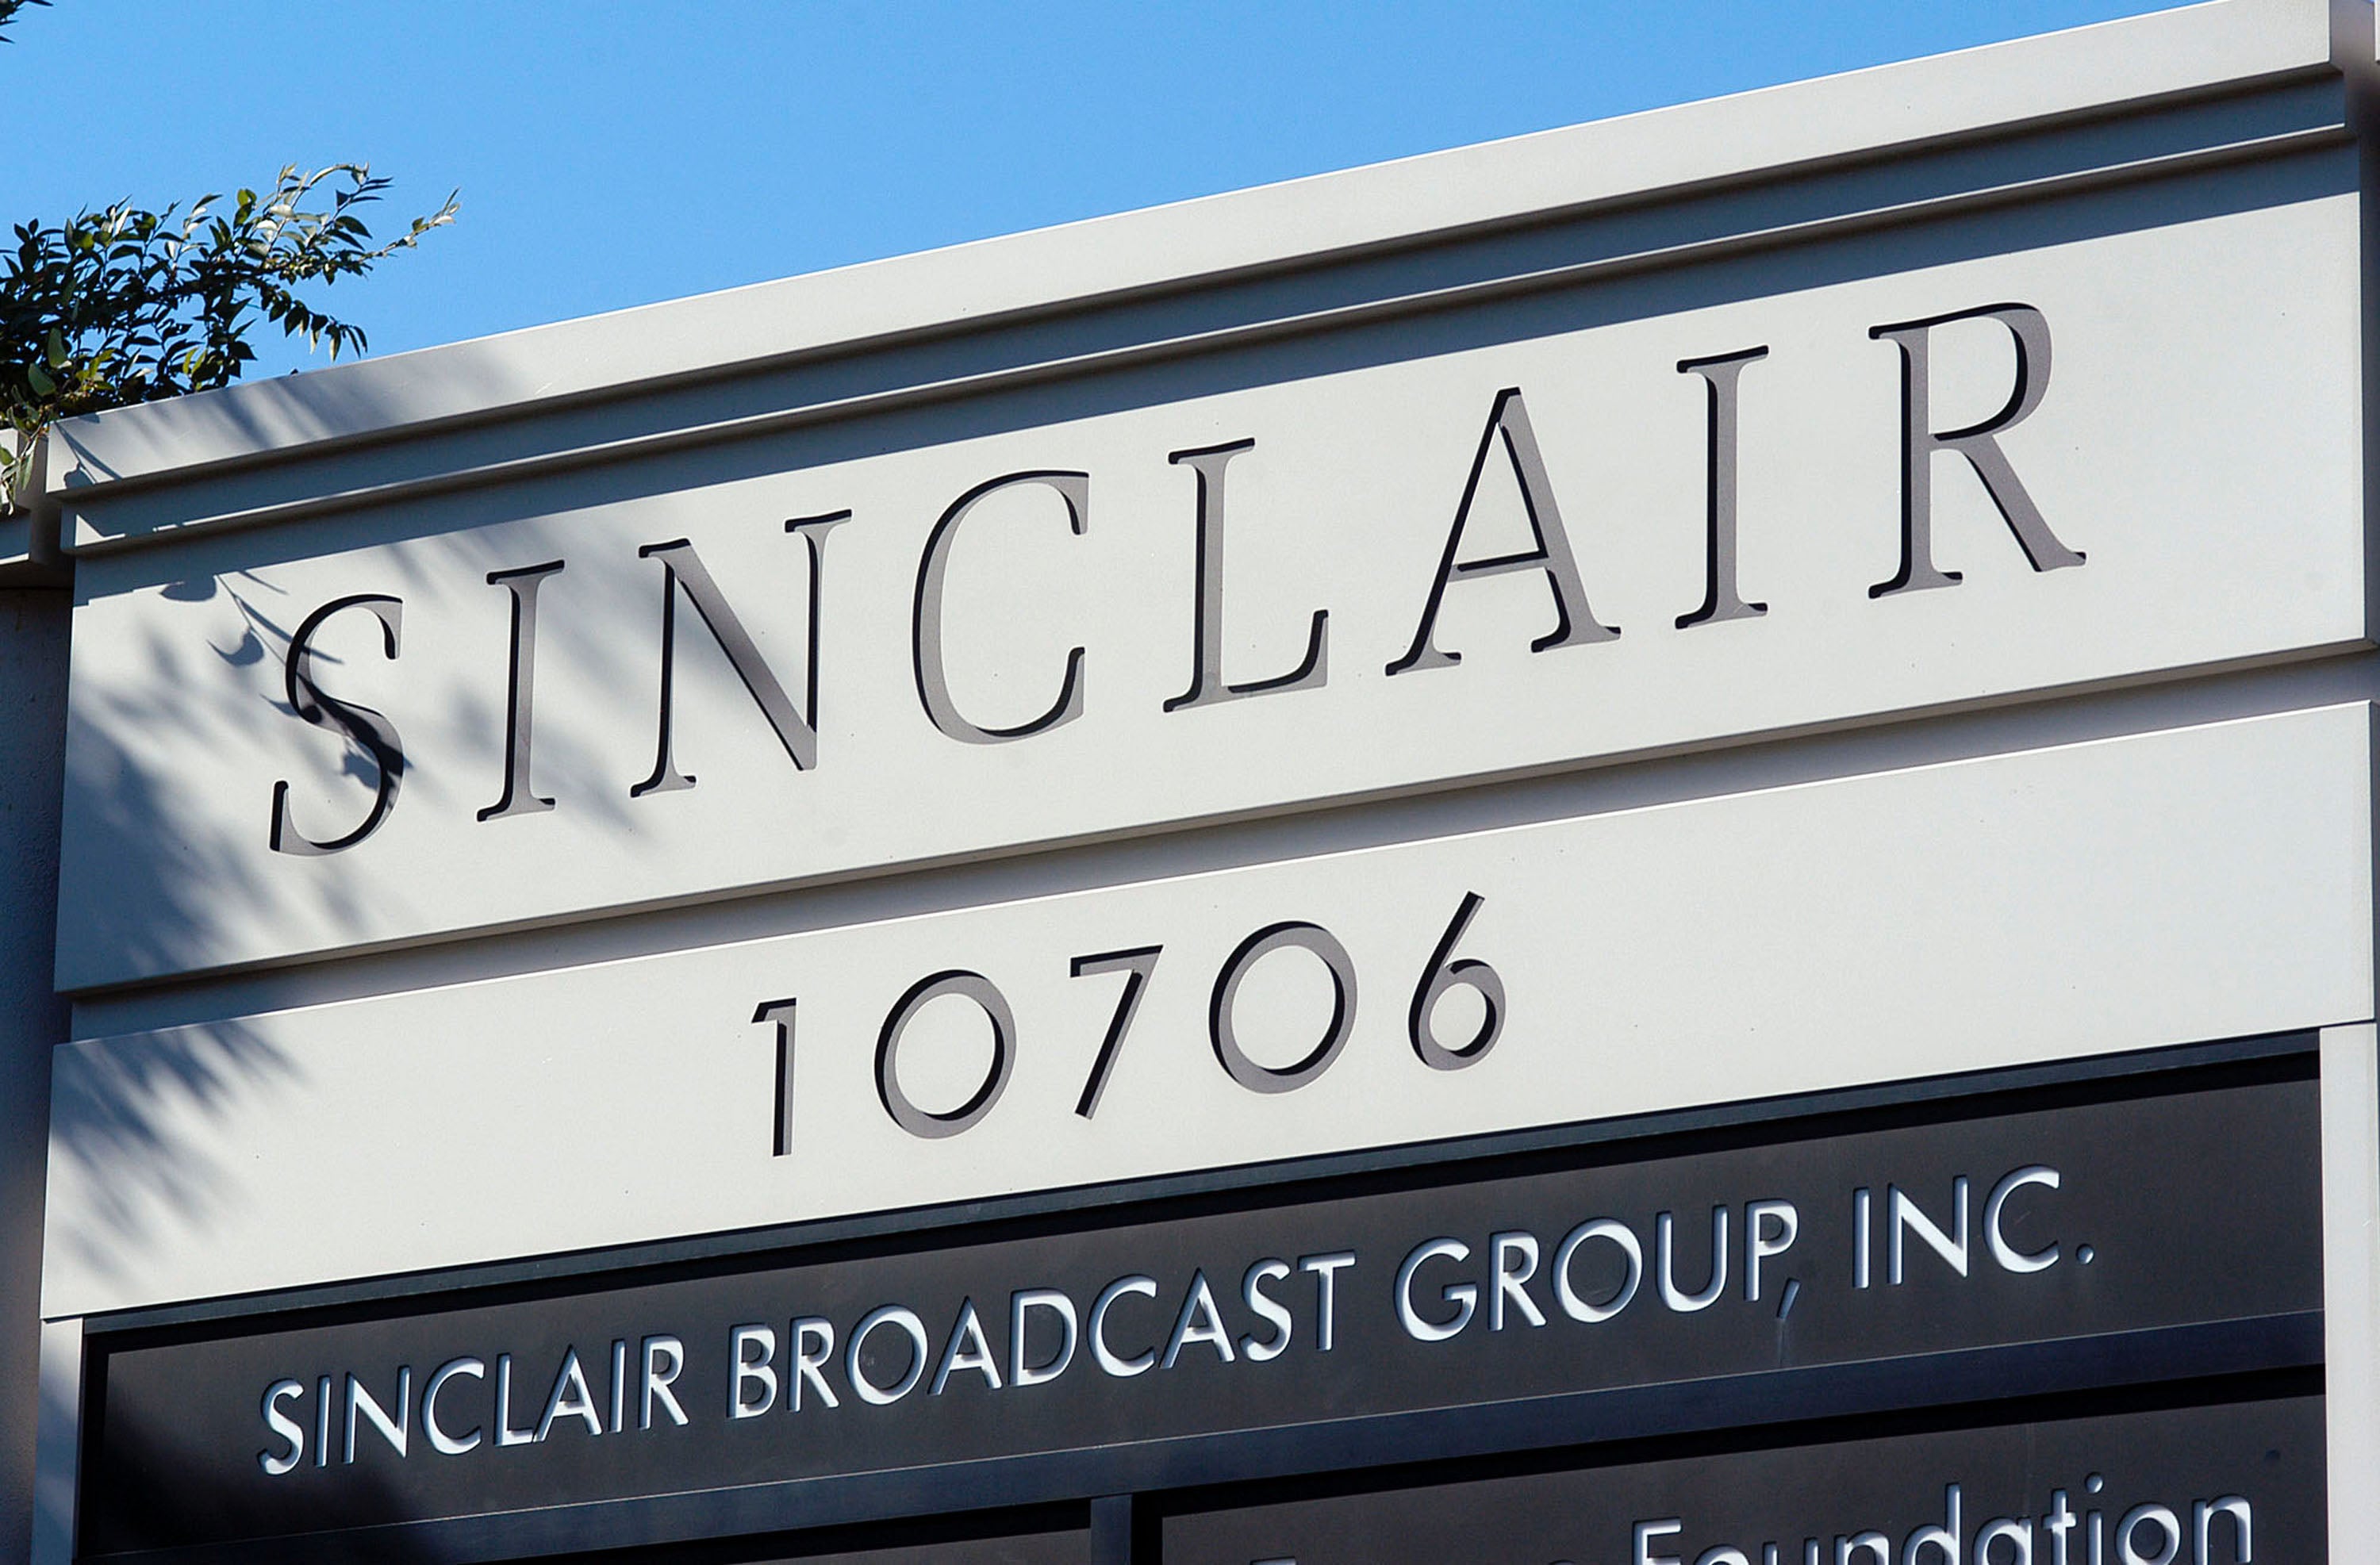 A Sinclair Broadcast Group representative called the incident ‘just bad judgment’